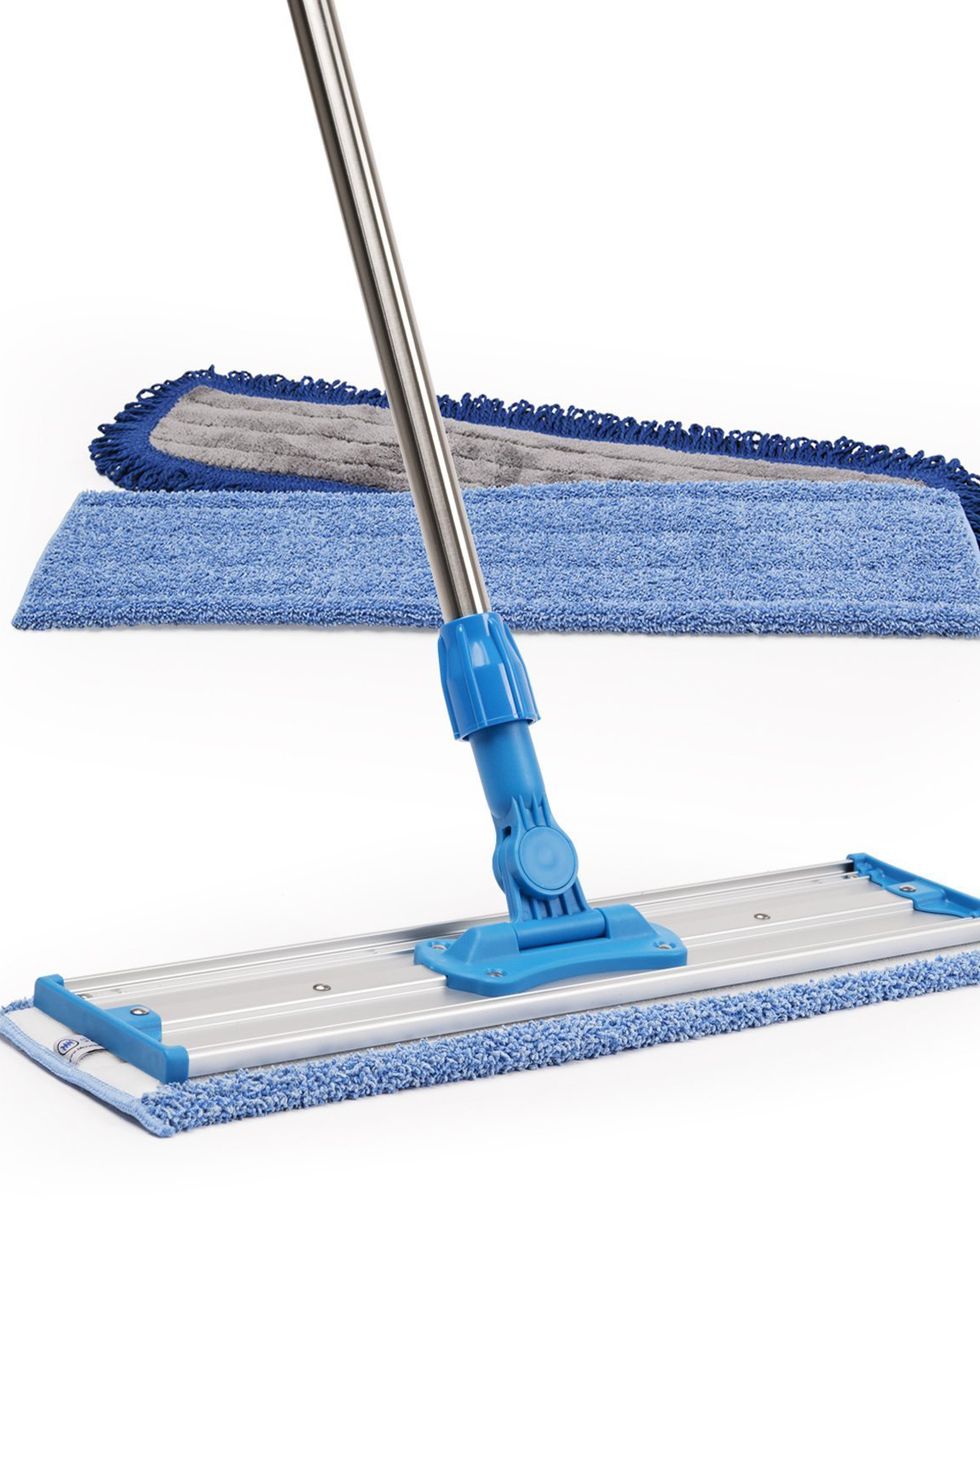 16 Cleaning Supplies & Tools You Can't Live Without - KristyWicks